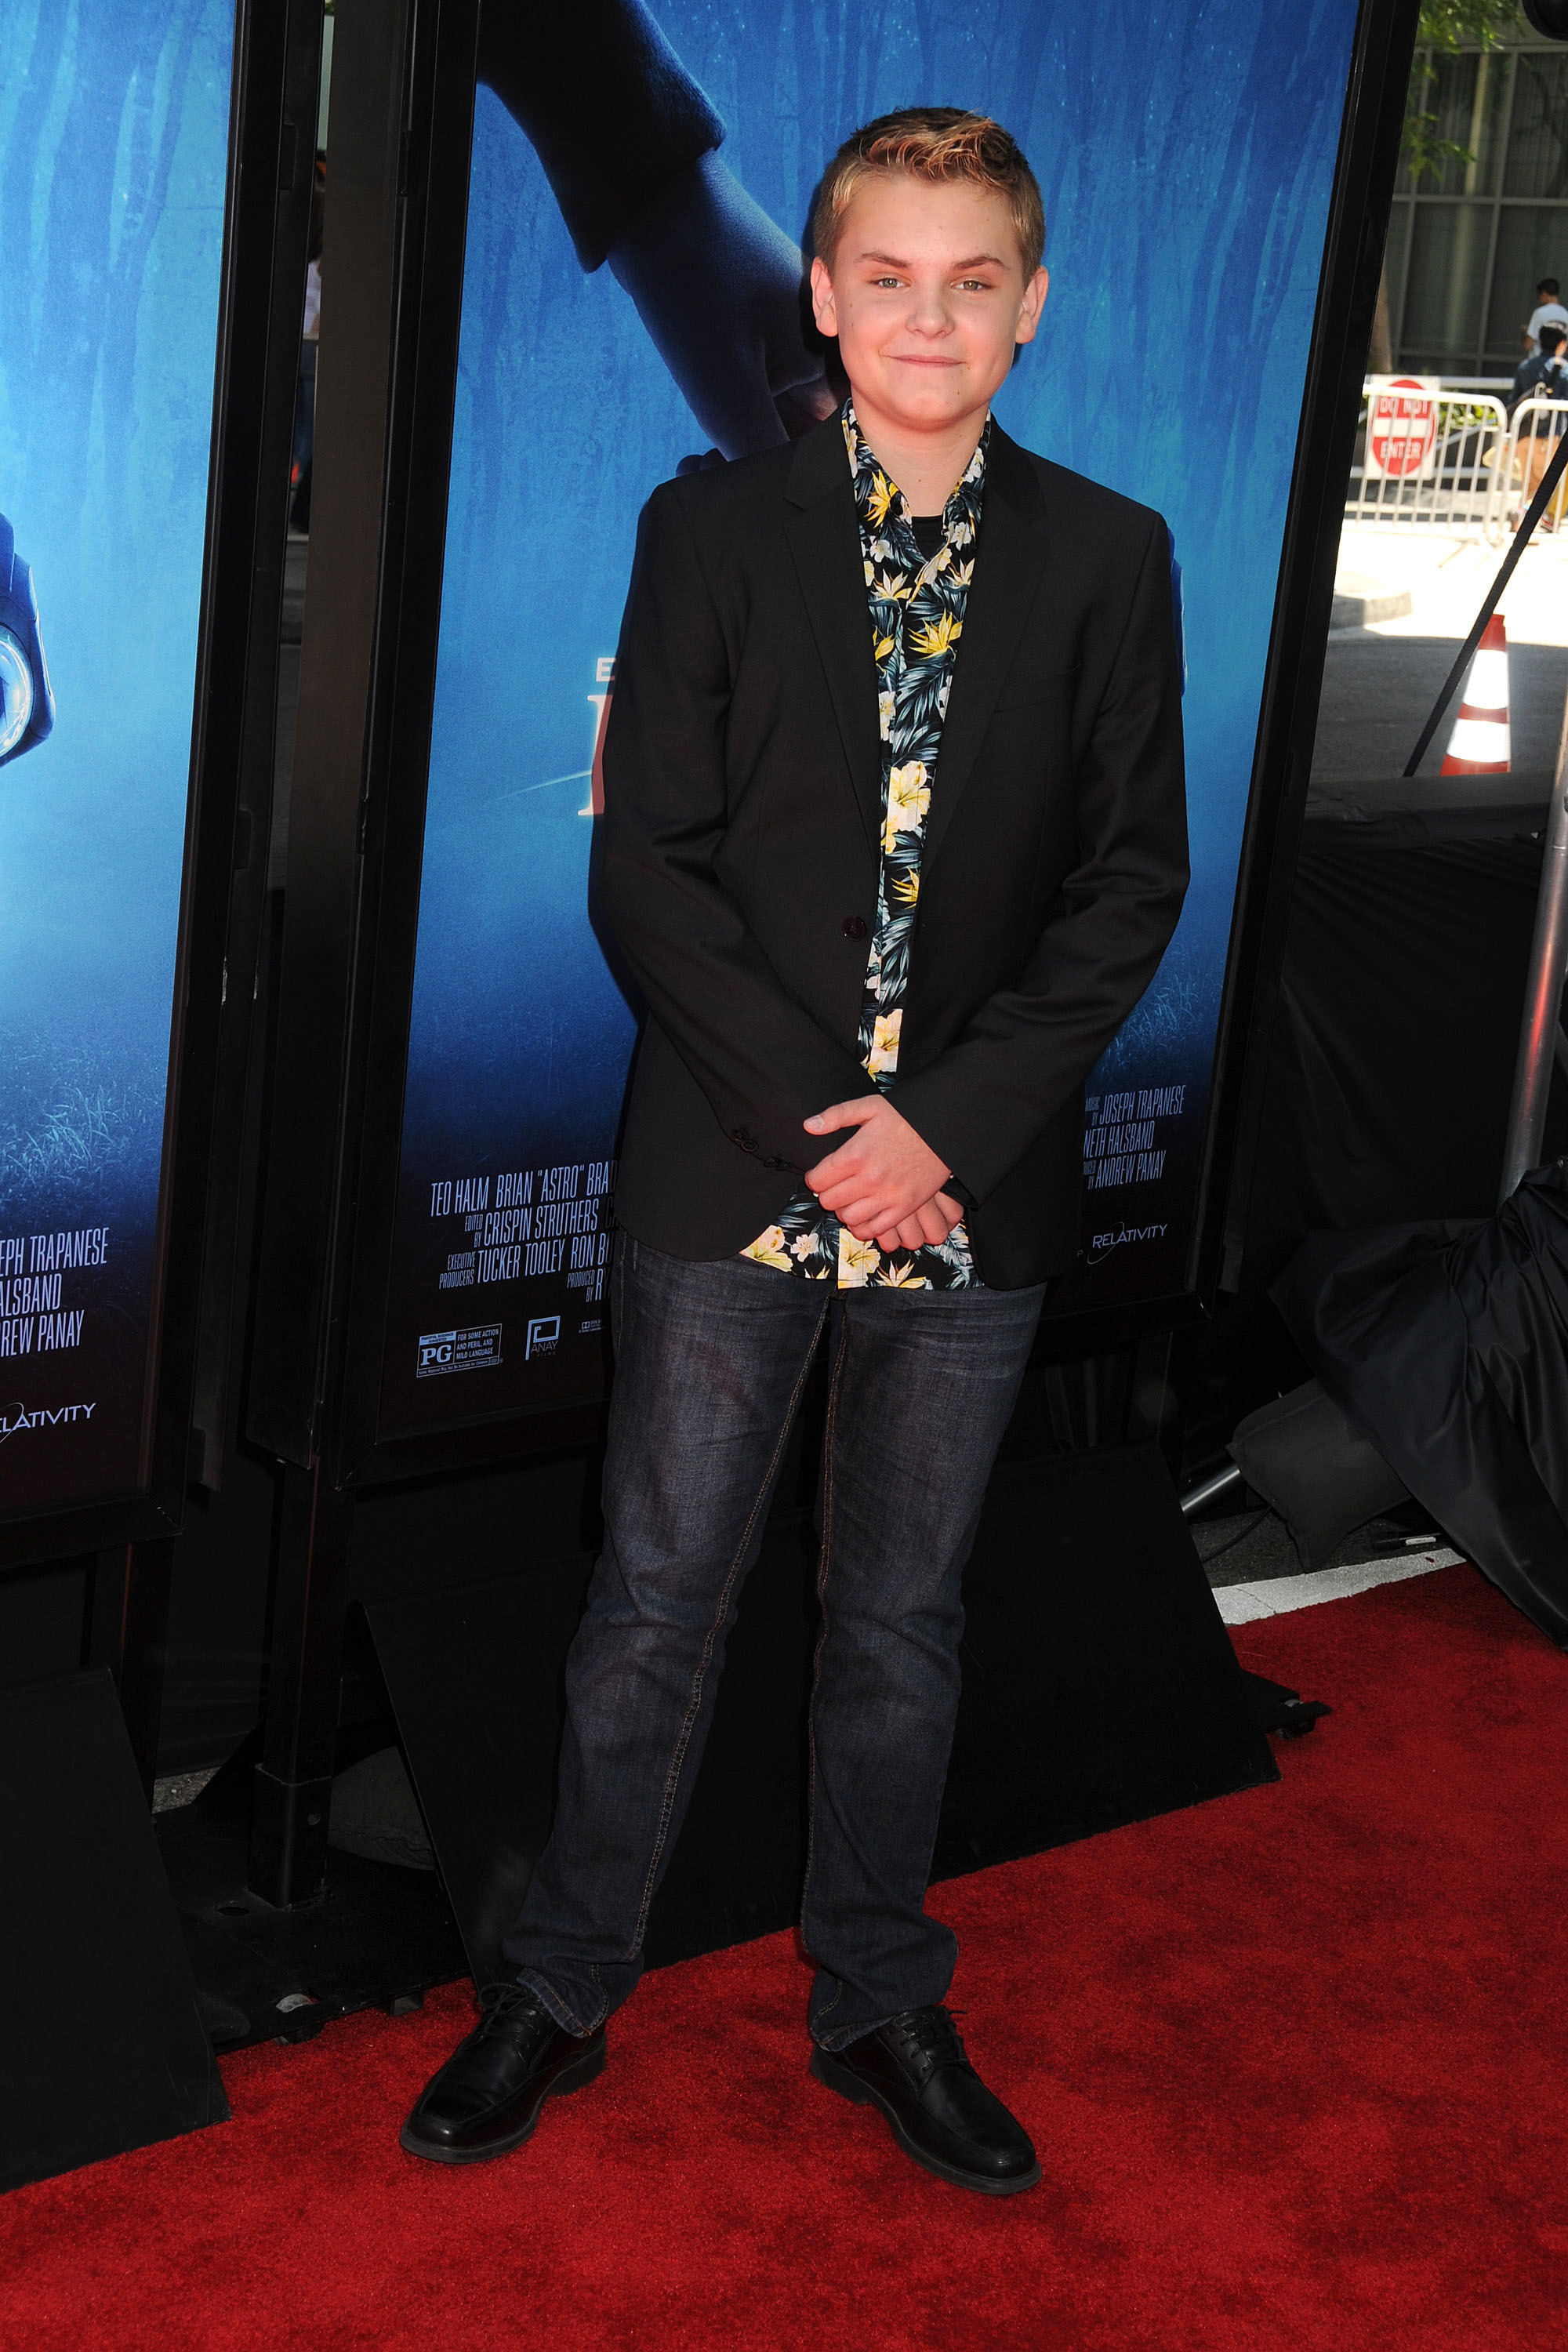 Reese Hartwig at the World Premiere of Earth To Echo at LA Live Regal Theaters on June 14, 2014.